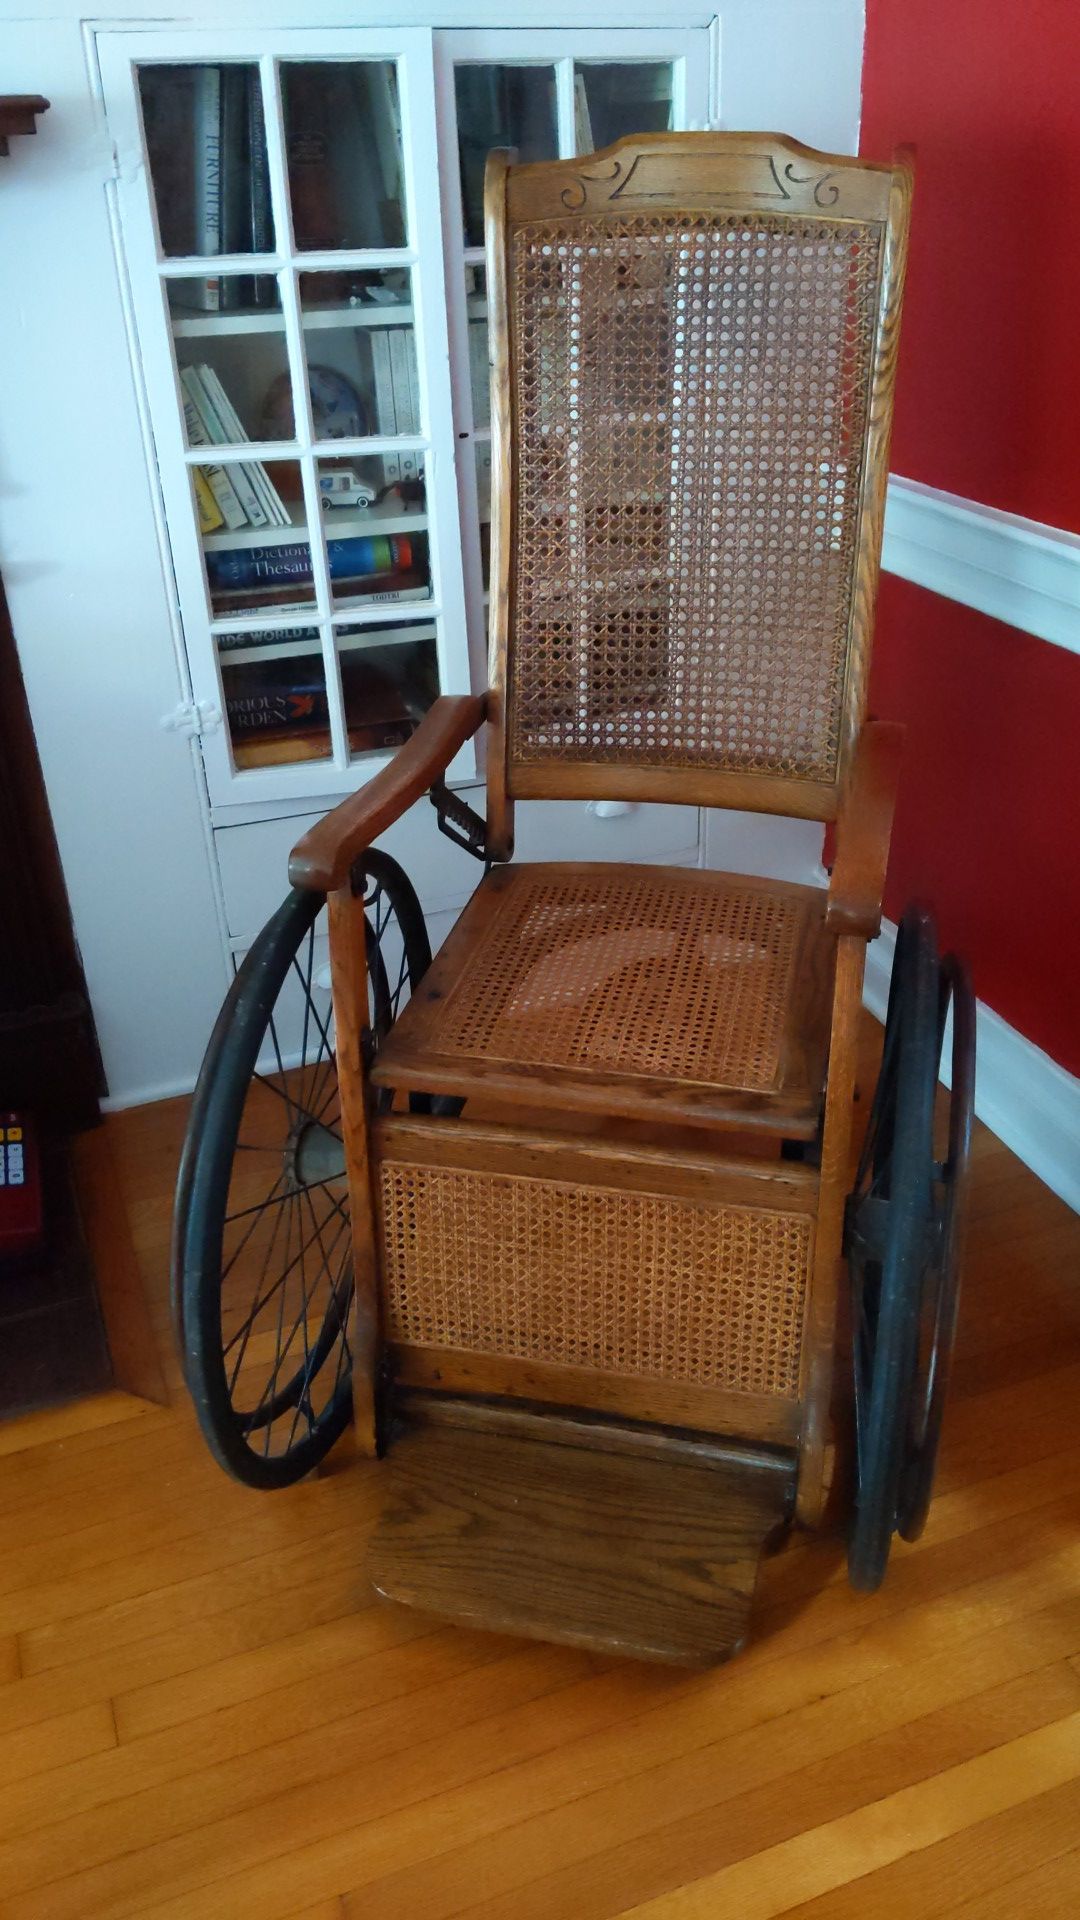 Antique wheelchair ,meant only for display purposes.